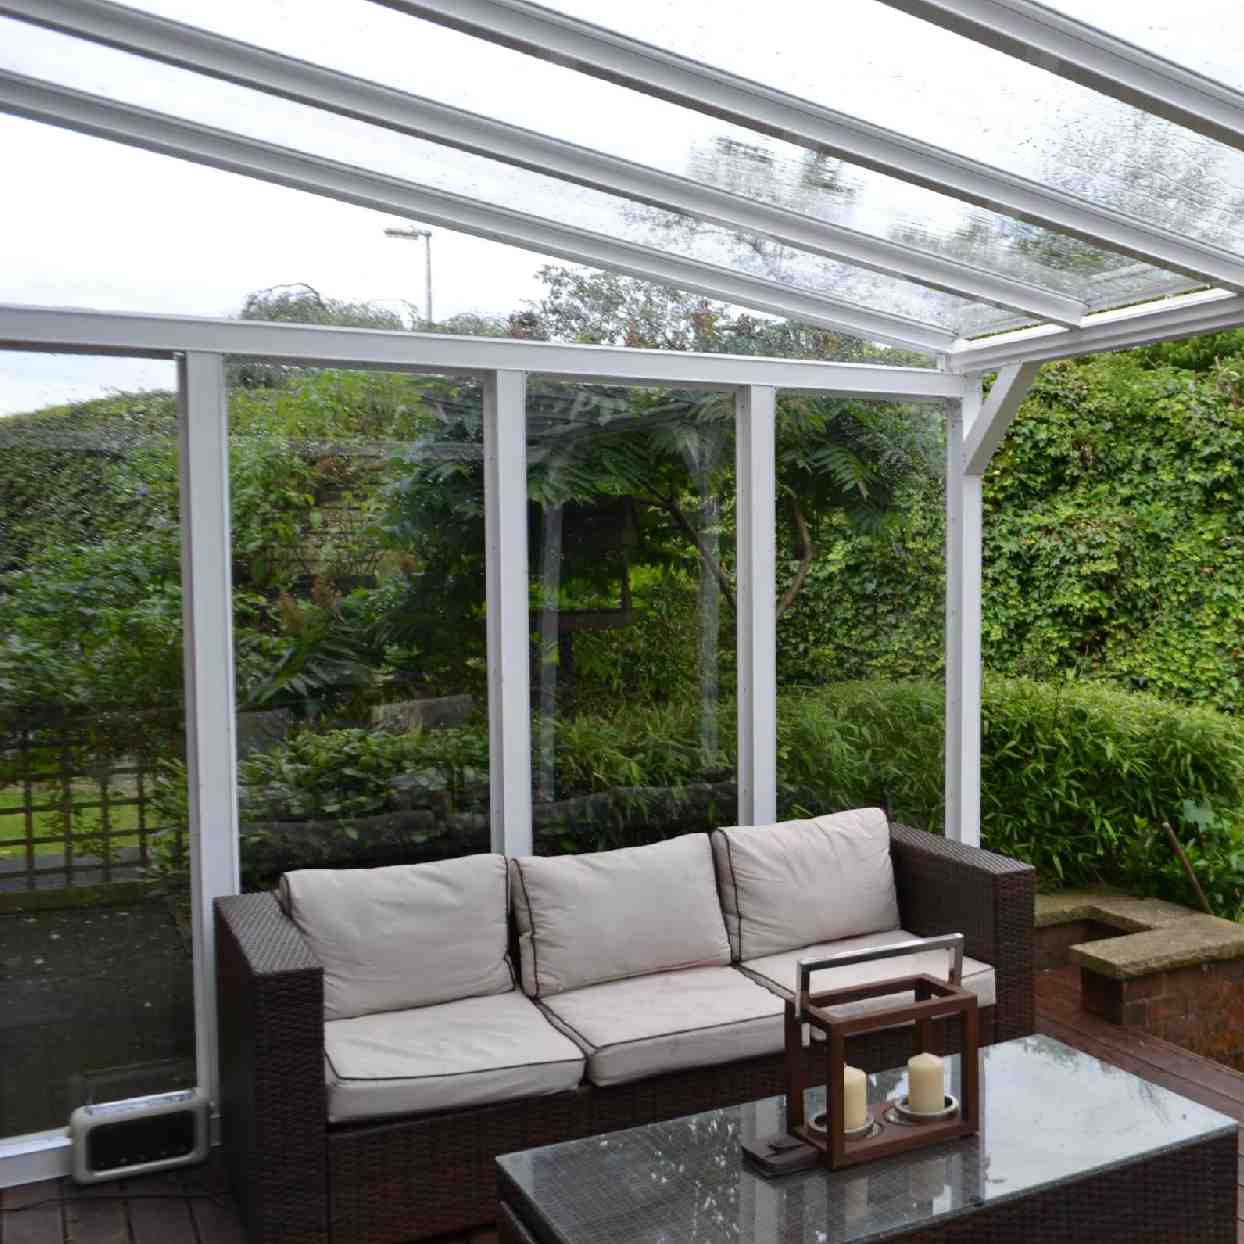 Buy Omega Verandah White with 16mm Polycarbonate Glazing - 4.9m (W) x 4.0m (P), (3) Supporting Posts online today